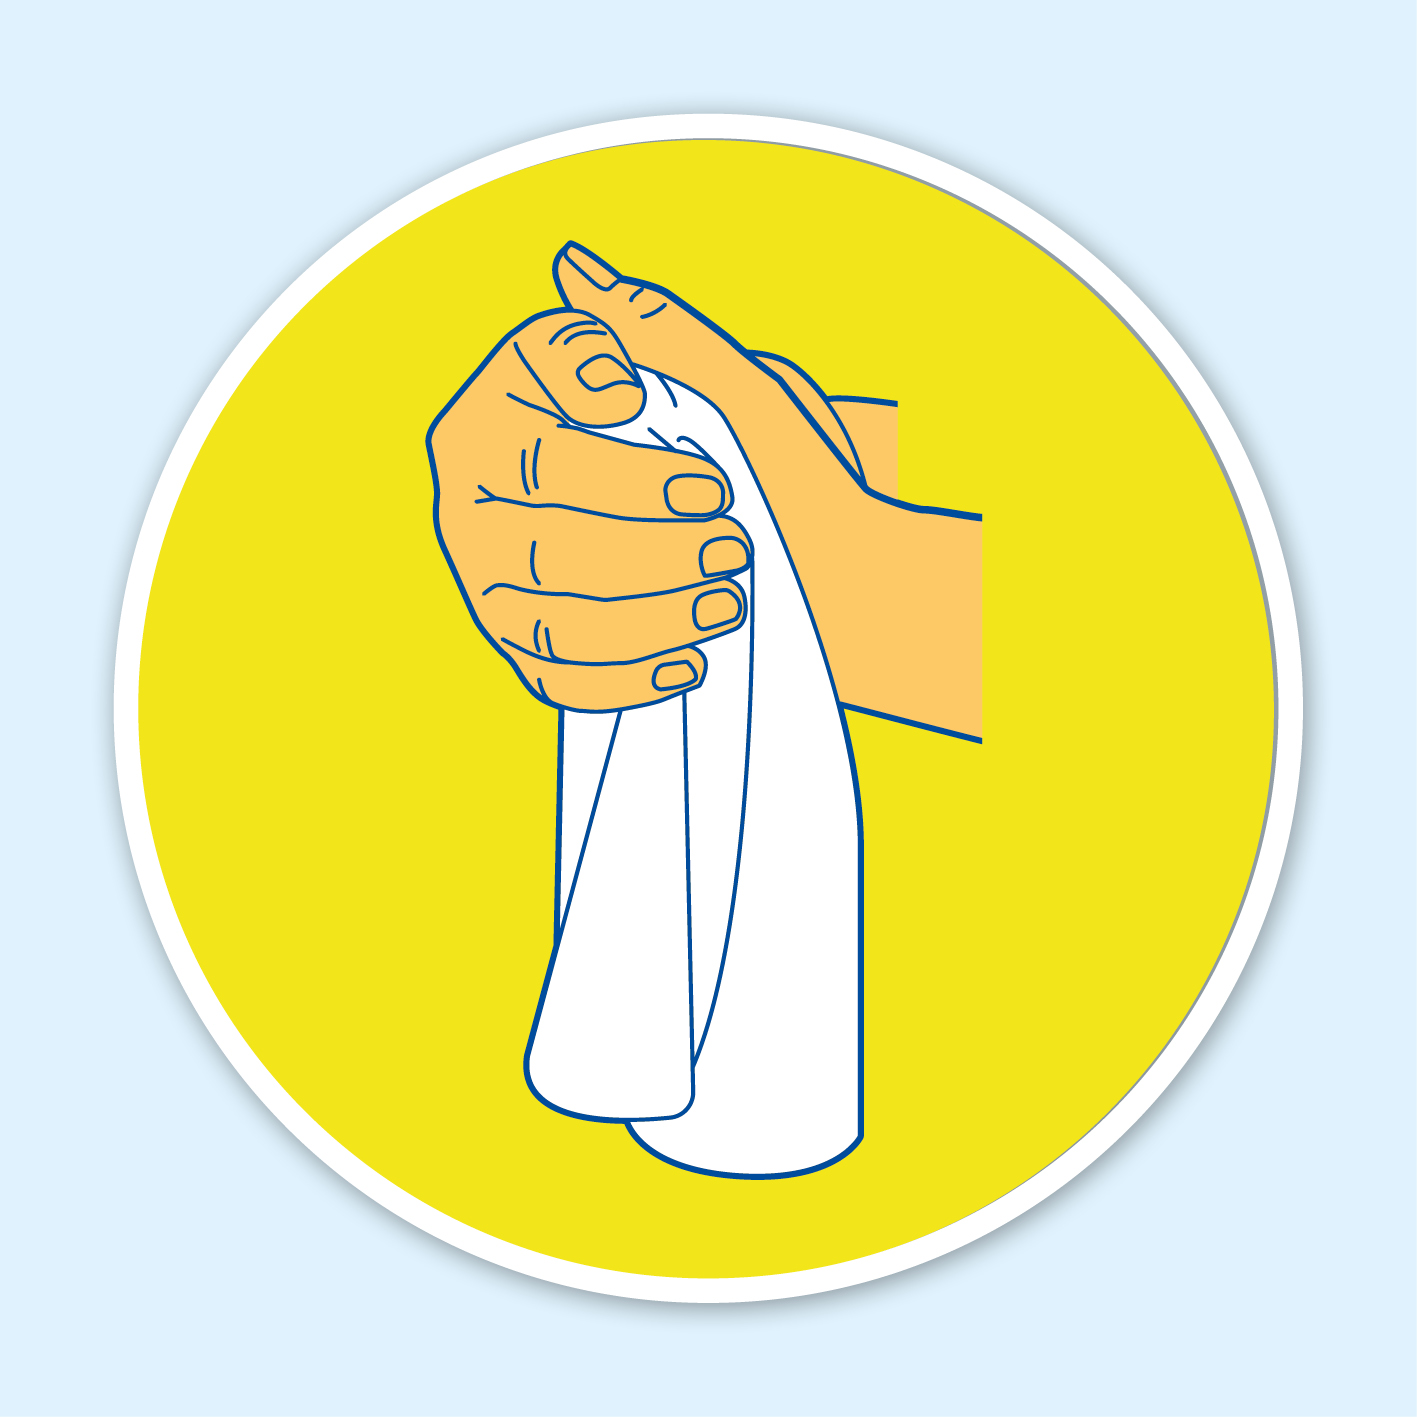 Illustration showing hands being dried with a towel